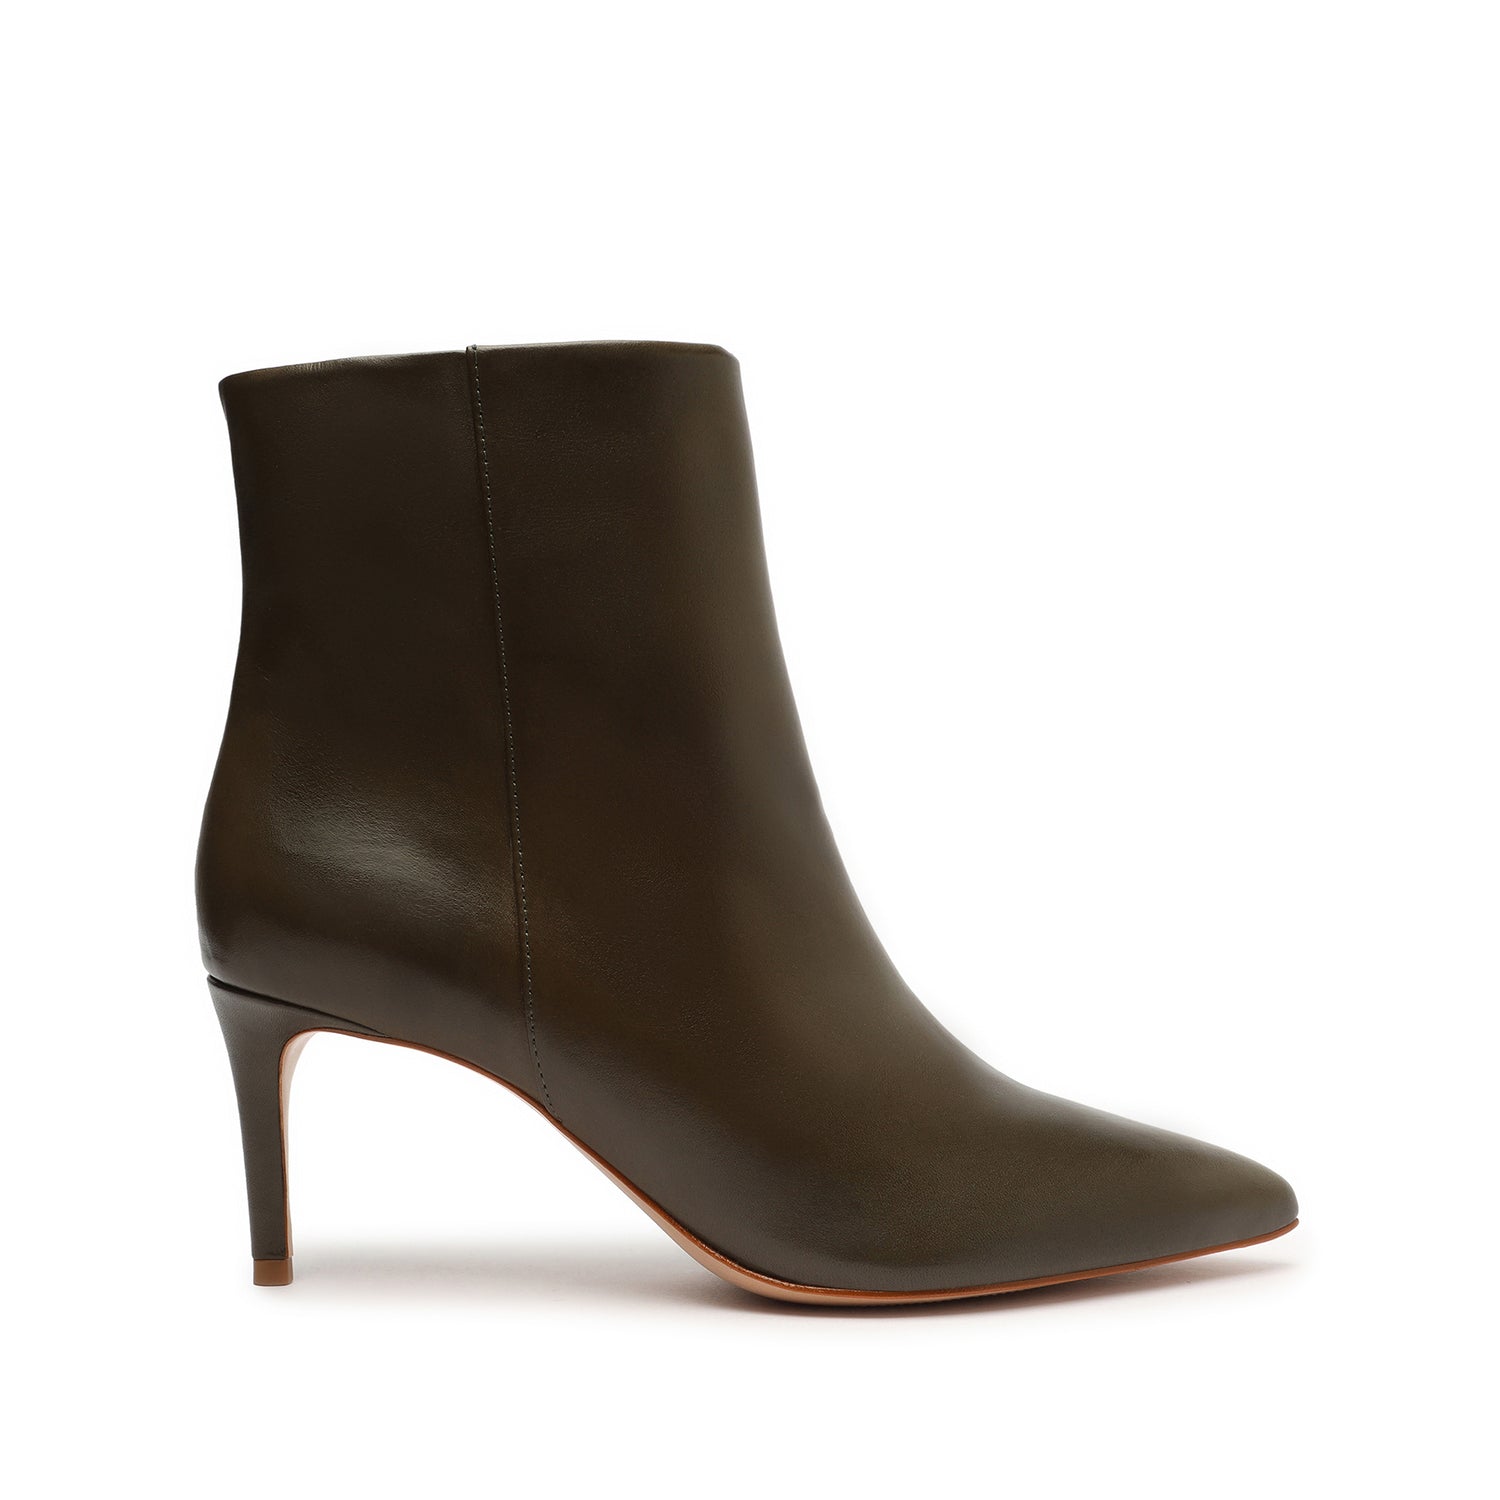 Mikki Mid Bootie Booties Fall 22 5 Military Green Leather - Schutz Shoes